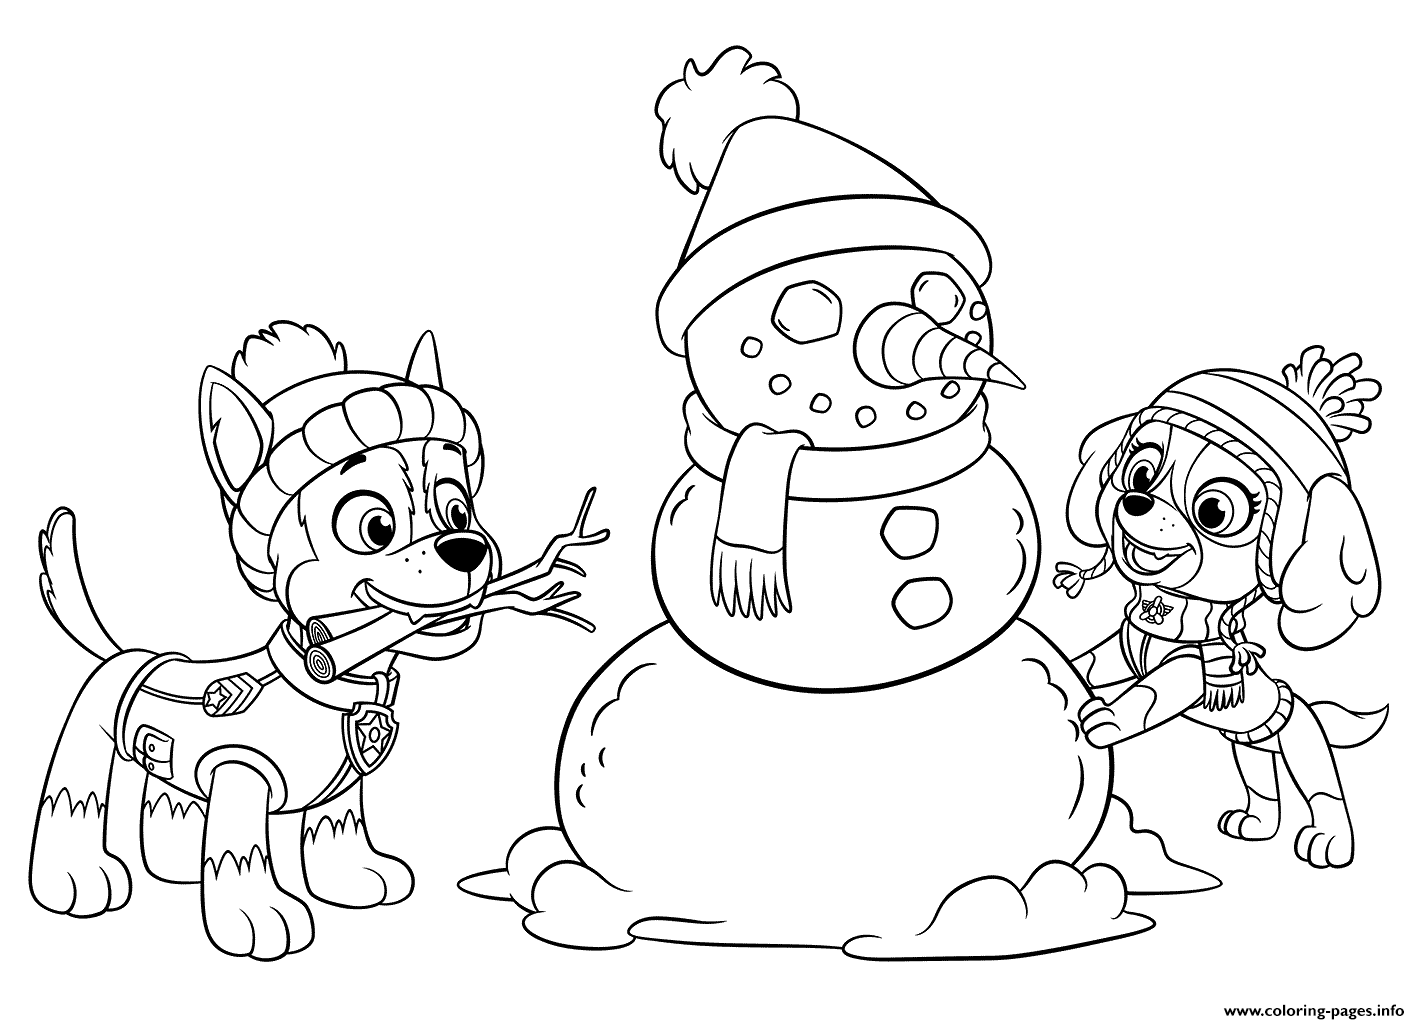 Holidays With The PAW Patrol Pups coloring